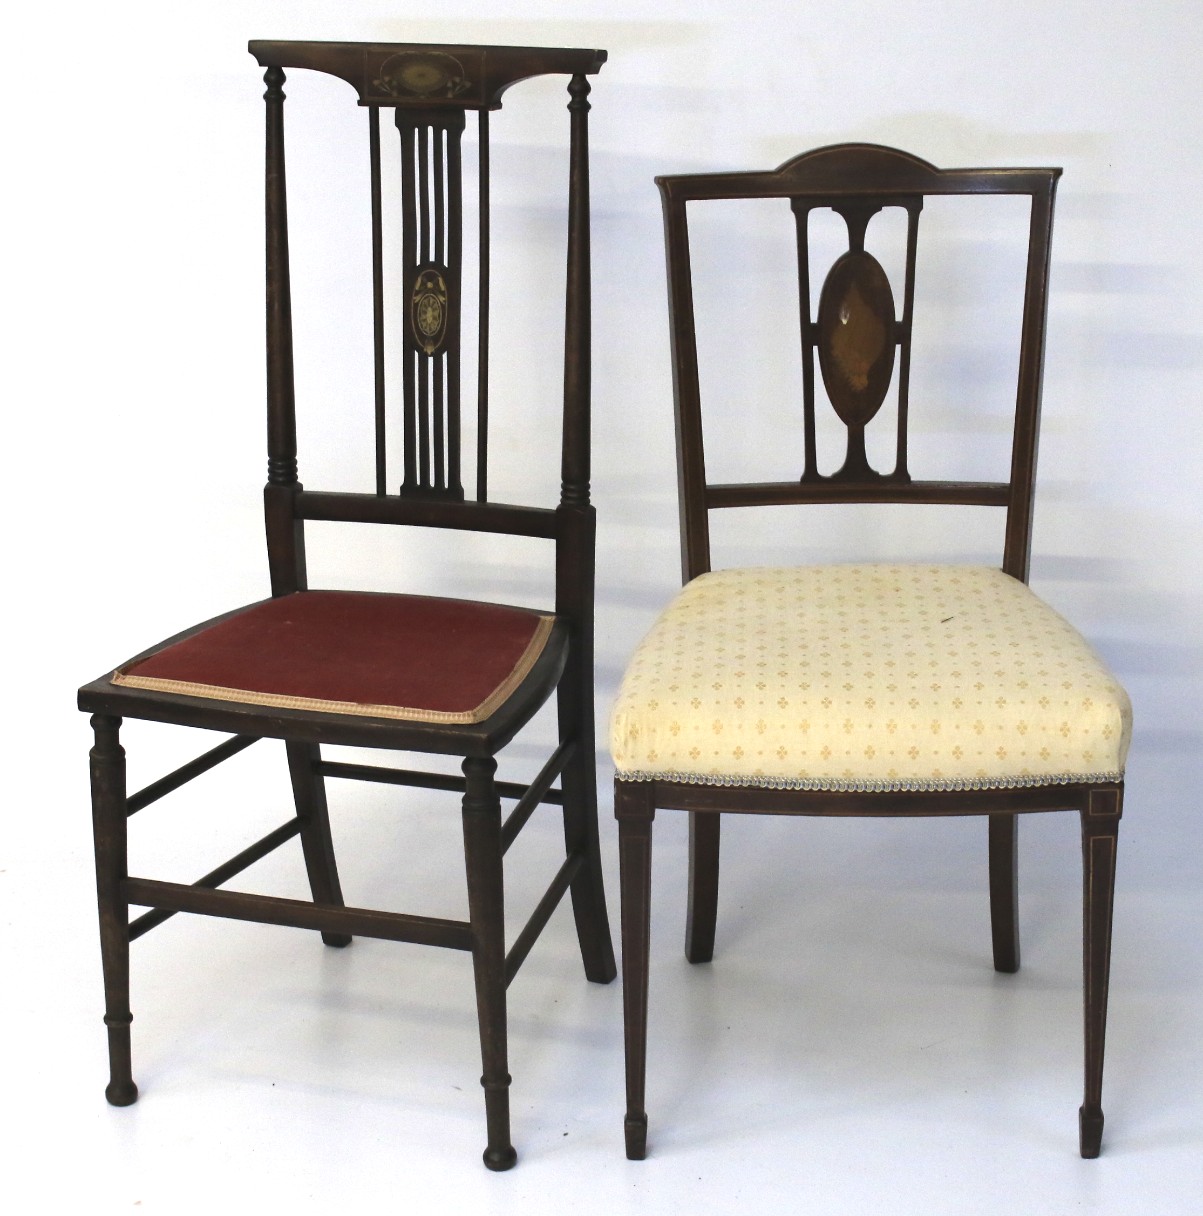 Two Victorian mahogany chairs.